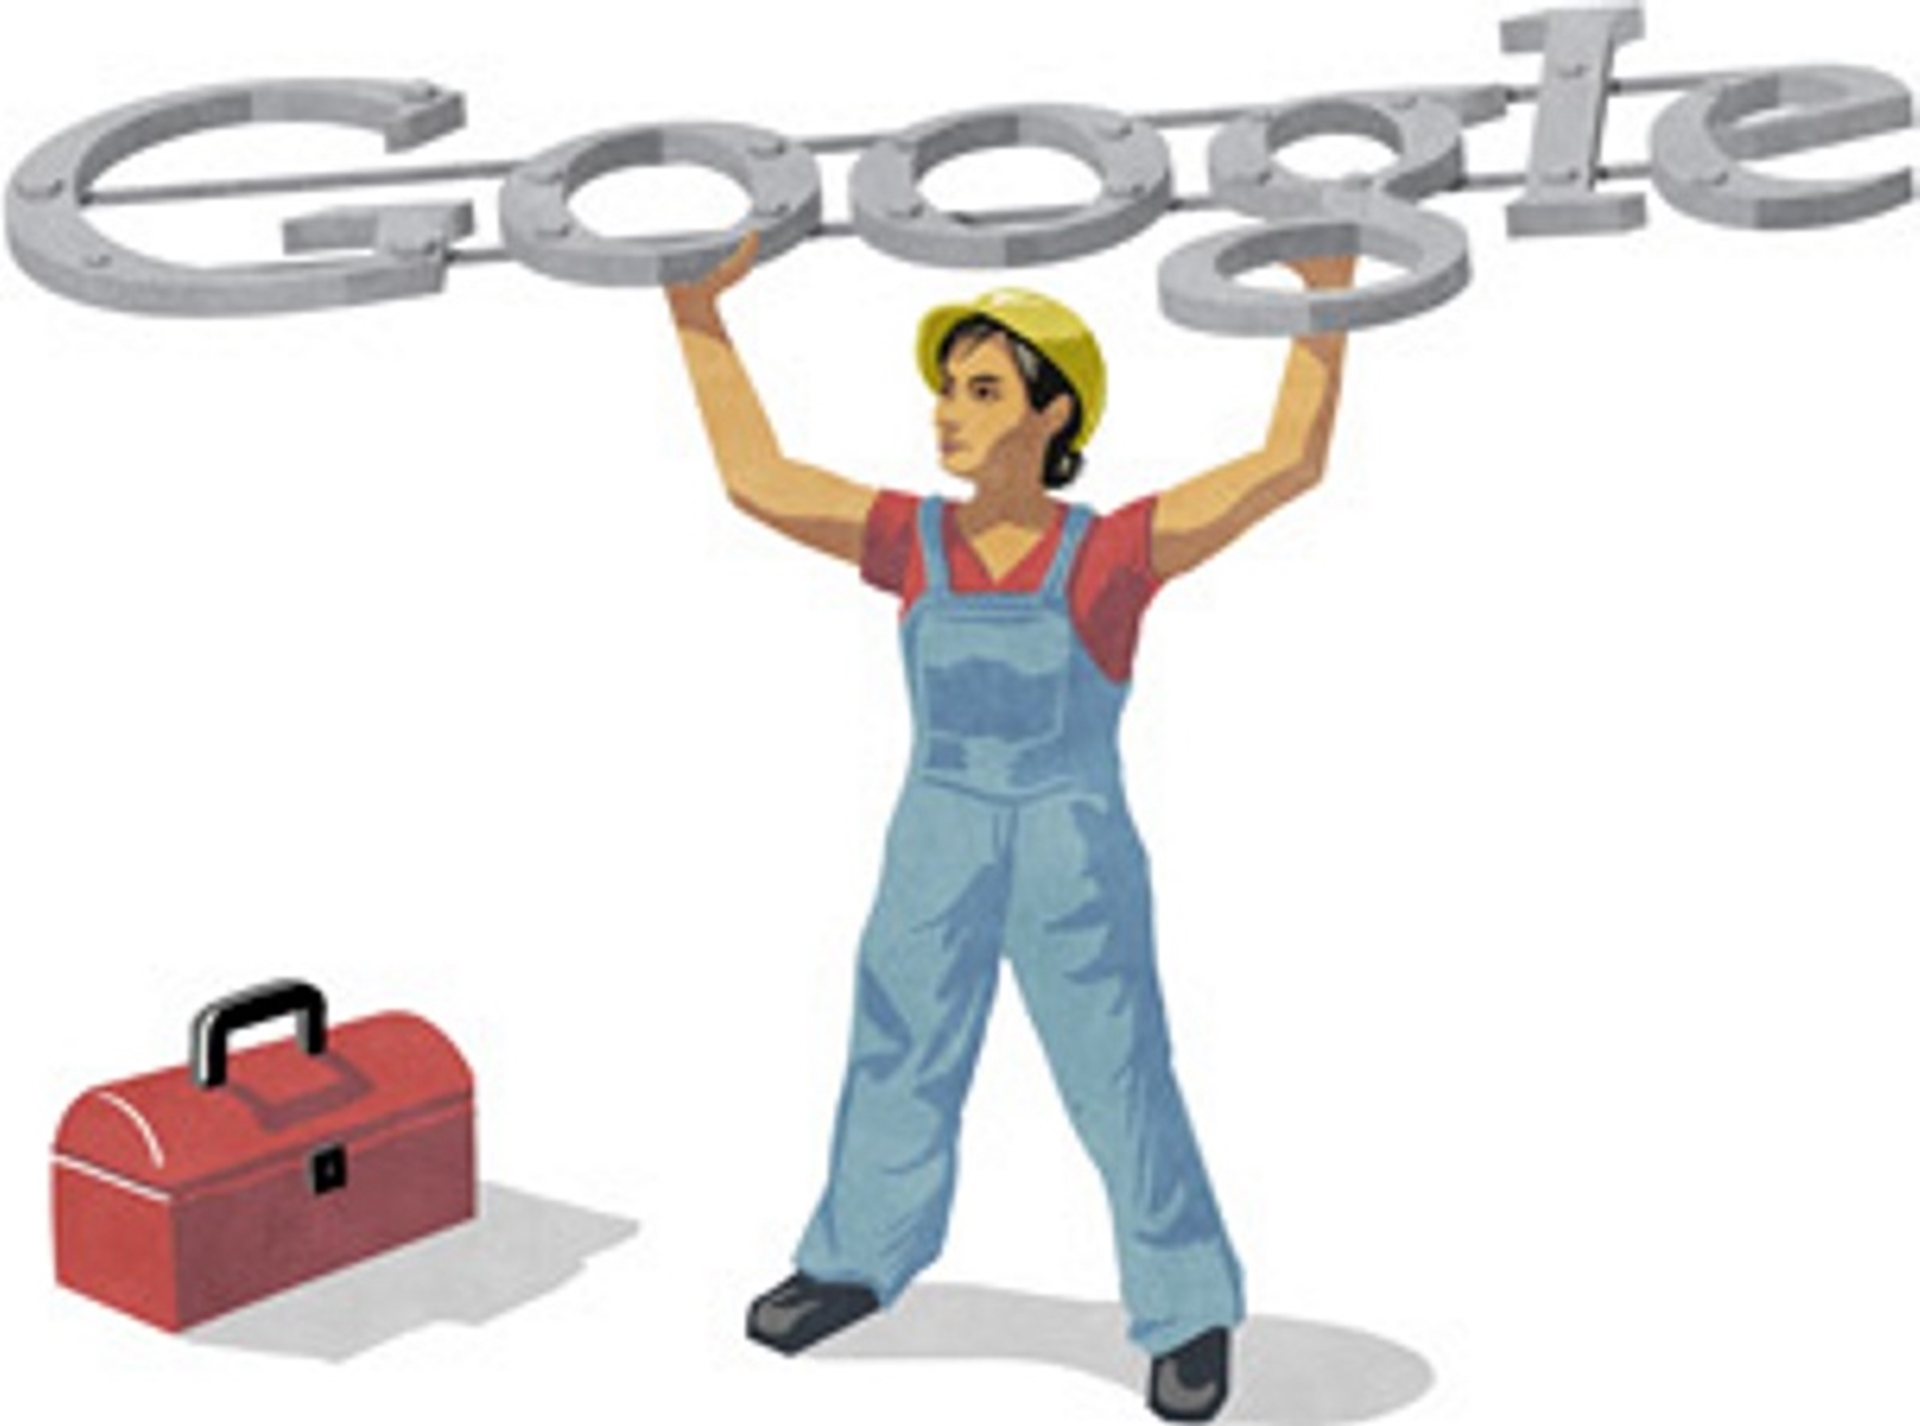 Google Doodle Labor Day